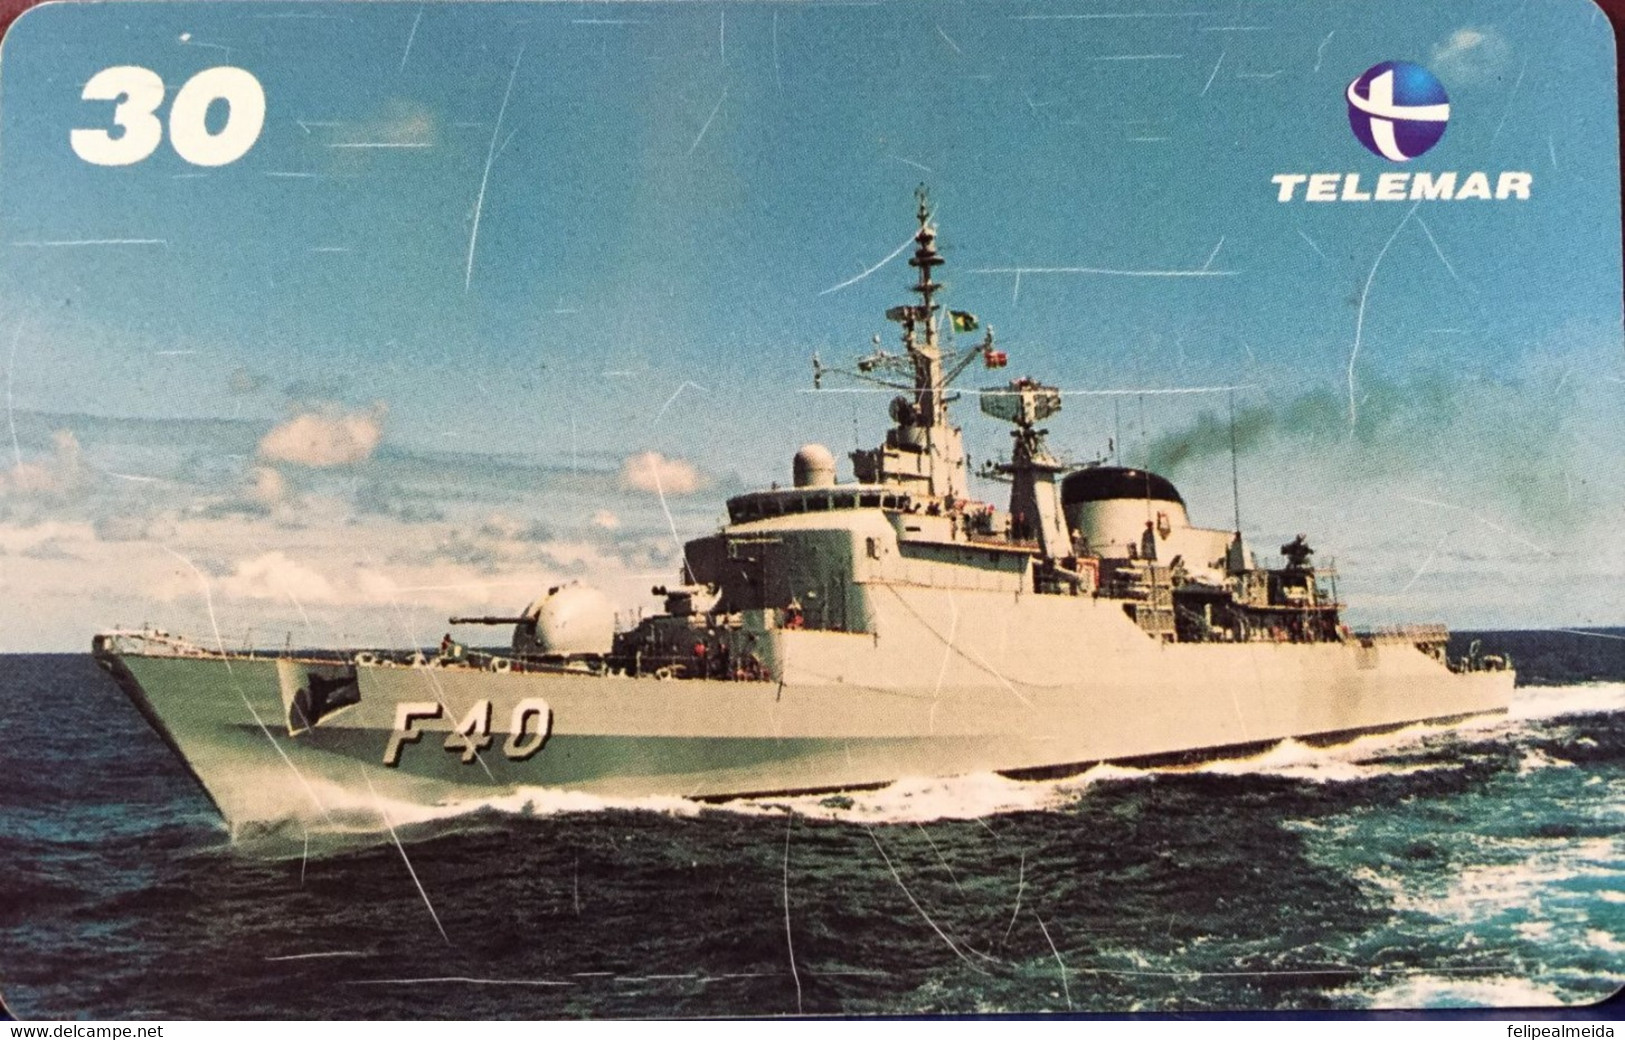 Phone Card Manufactured By Telemar In 2000 - Brazilian Navy - Commemoration Of The Fleet's 178th Anniversary - Photo Fra - Leger